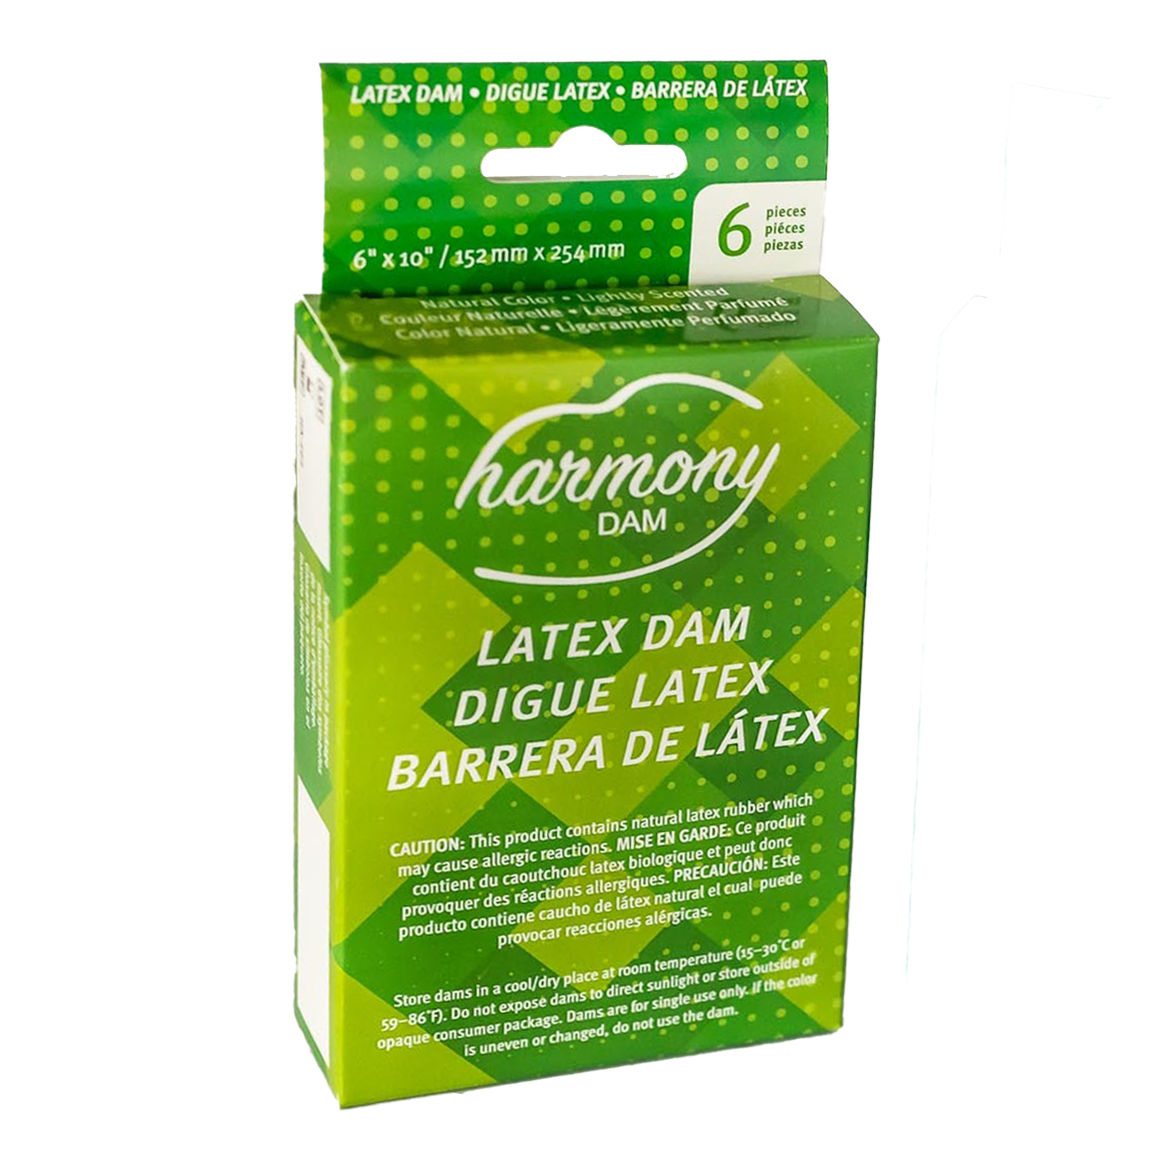 Harmony Latex Oral Dams, Retail Box of 6, Case of 100